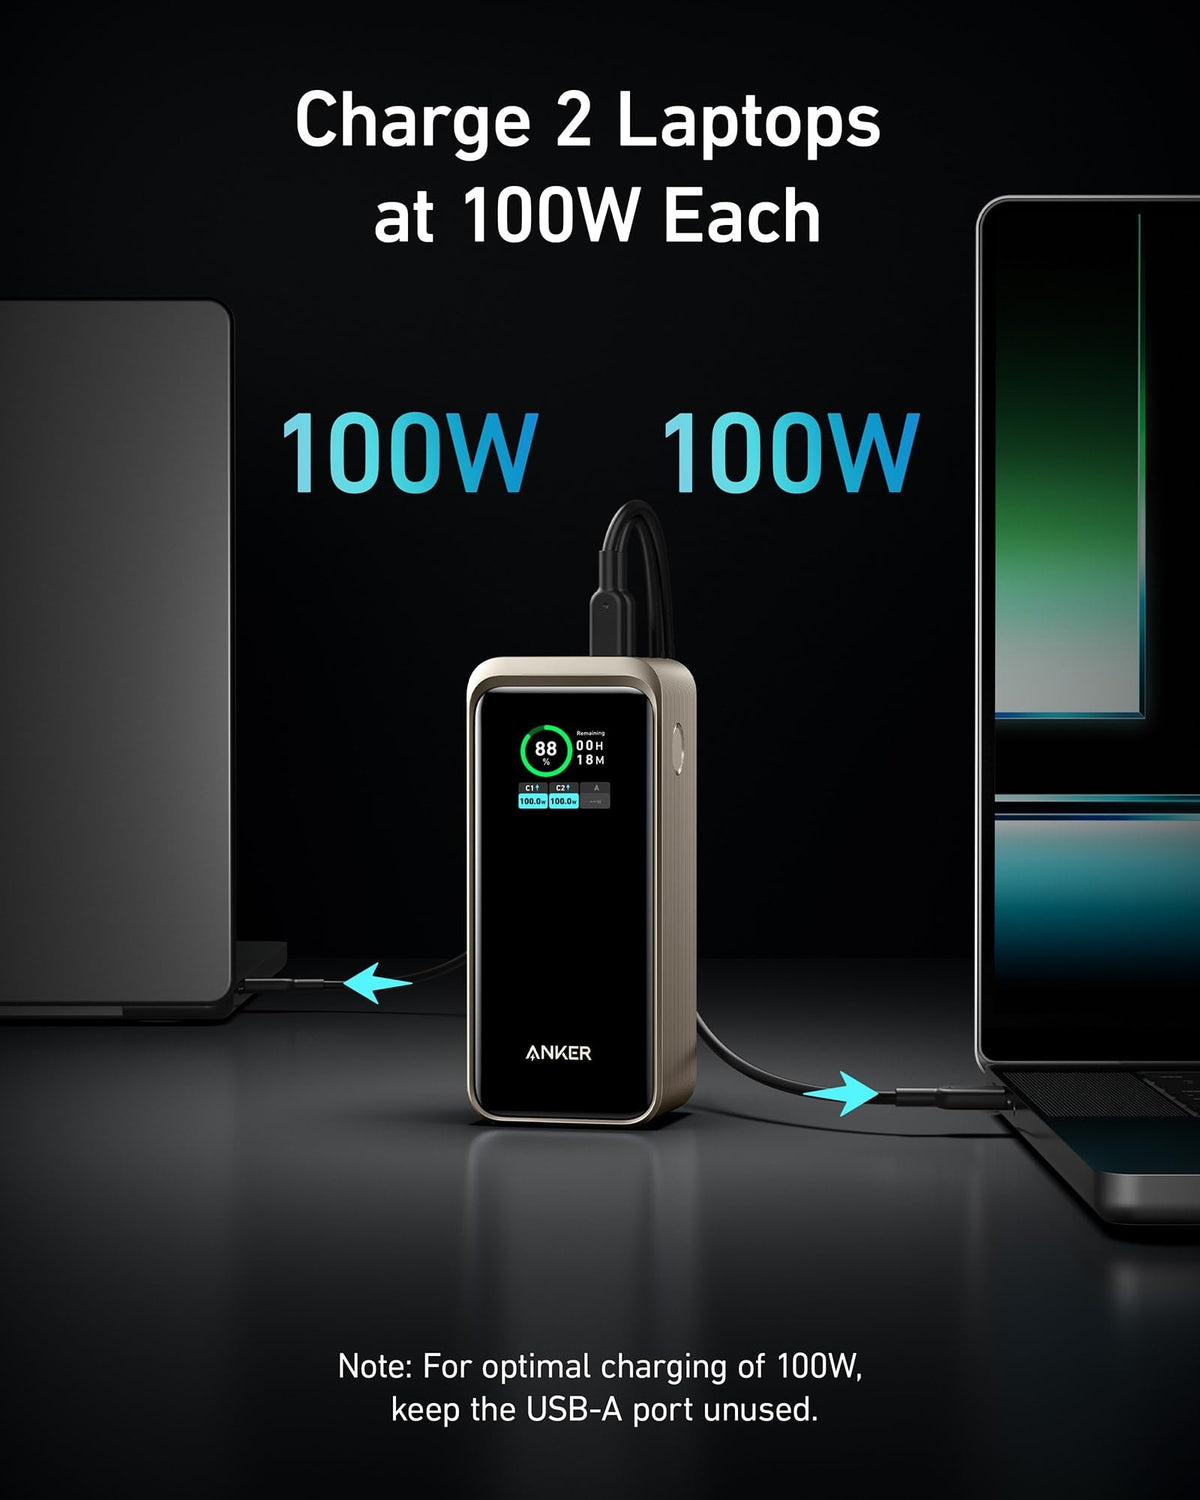 Anker Prime 20,000mAh Power Bank and Anker 543 USB-C to USB-C Cable (Bio-Based) - 2-Pack